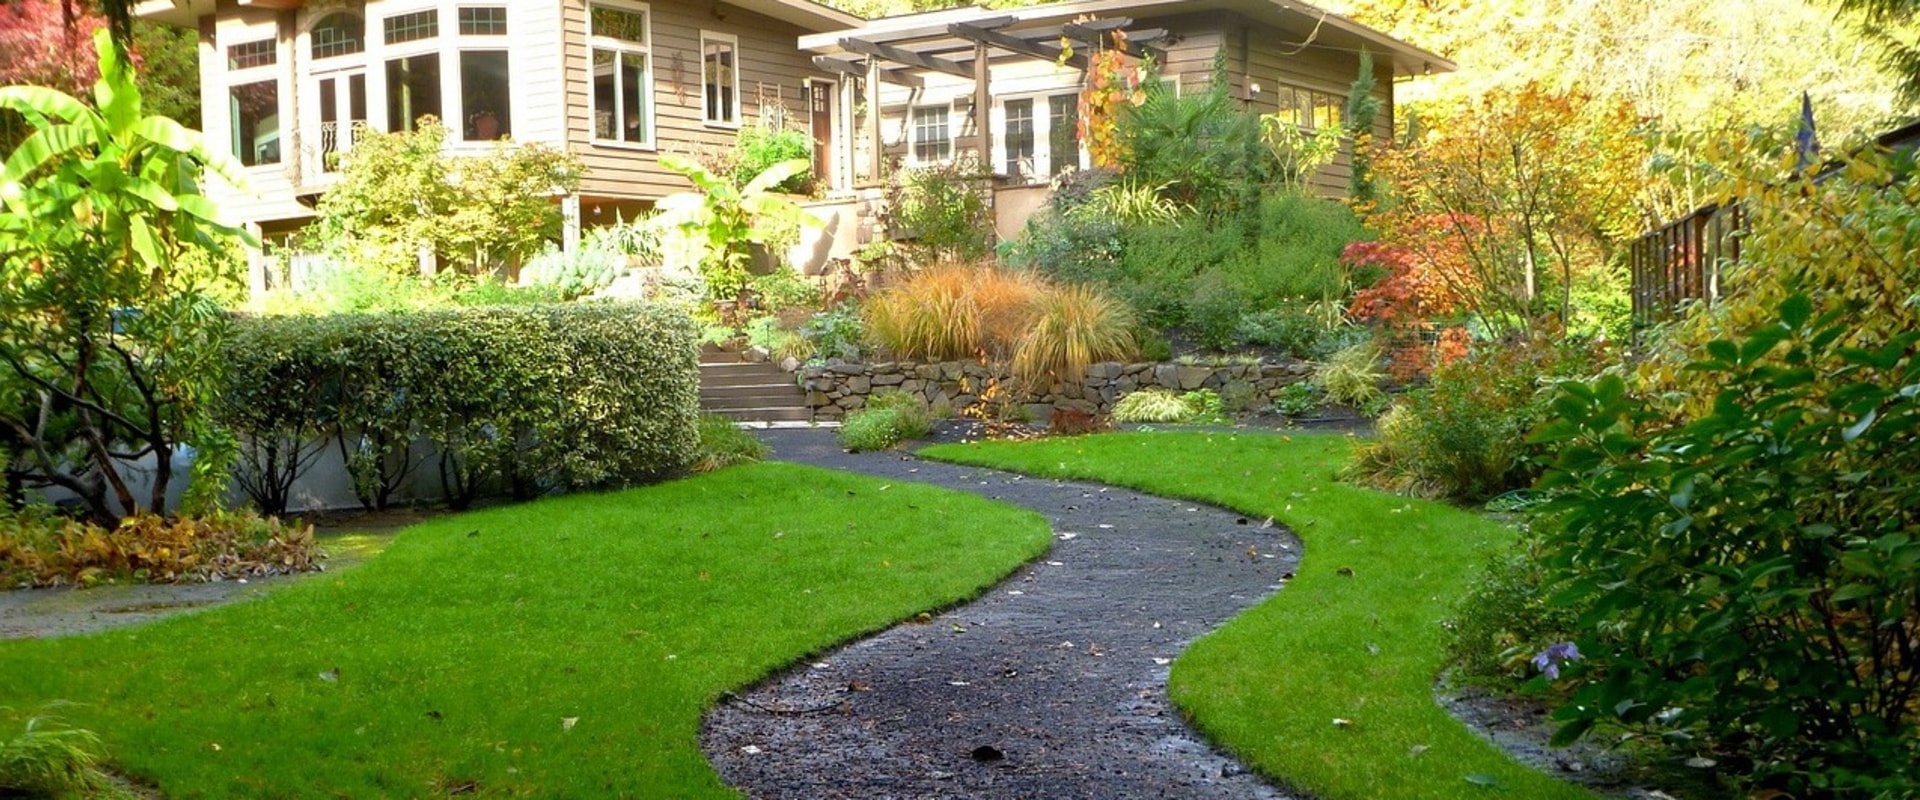 The Benefits of Landscaping to Sell Your Home